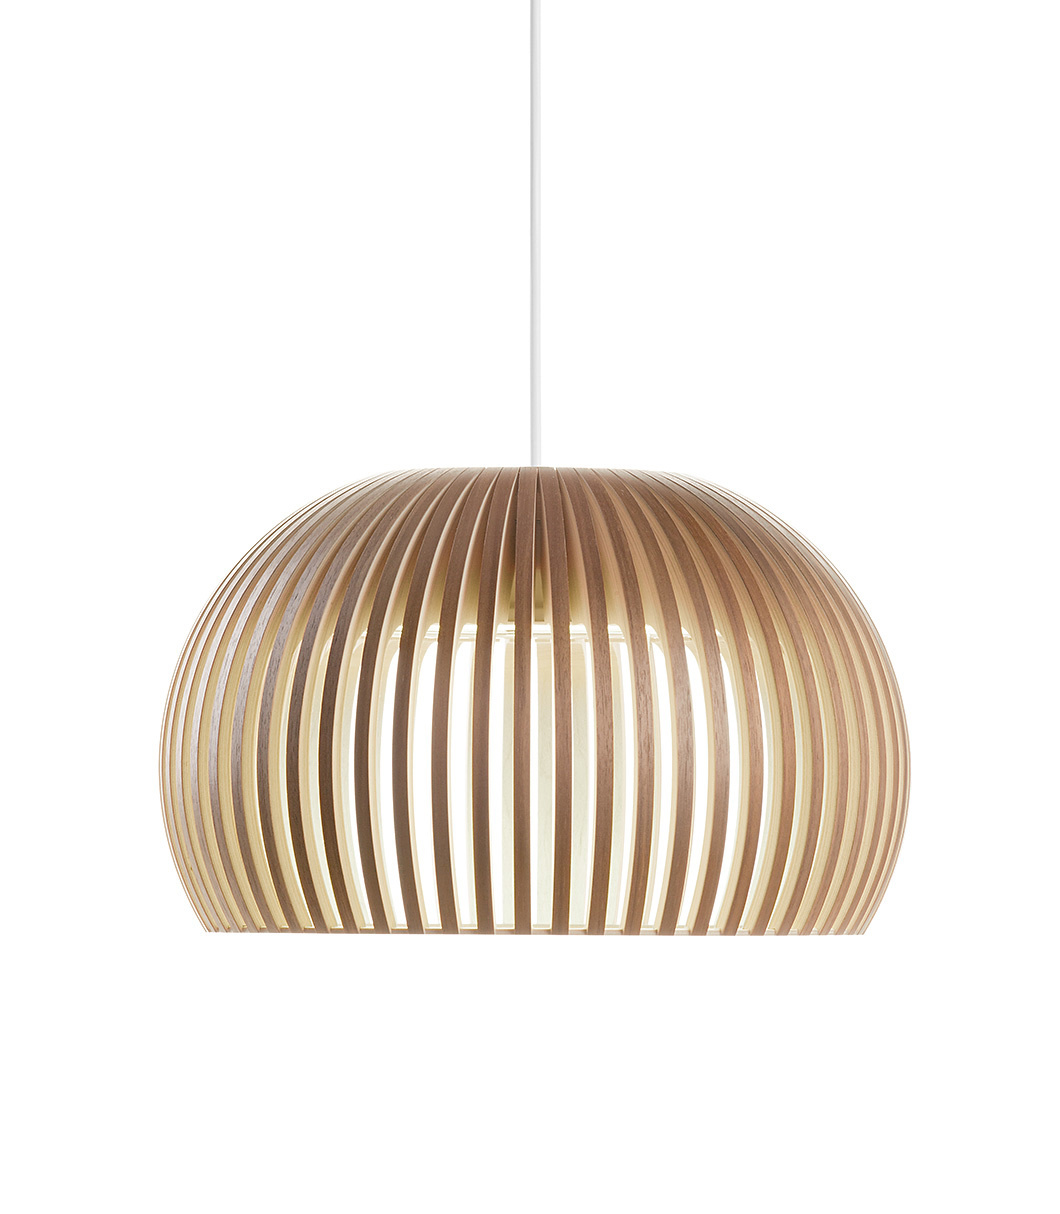 Atto 5000 pendant lamp is available in walnut veneer